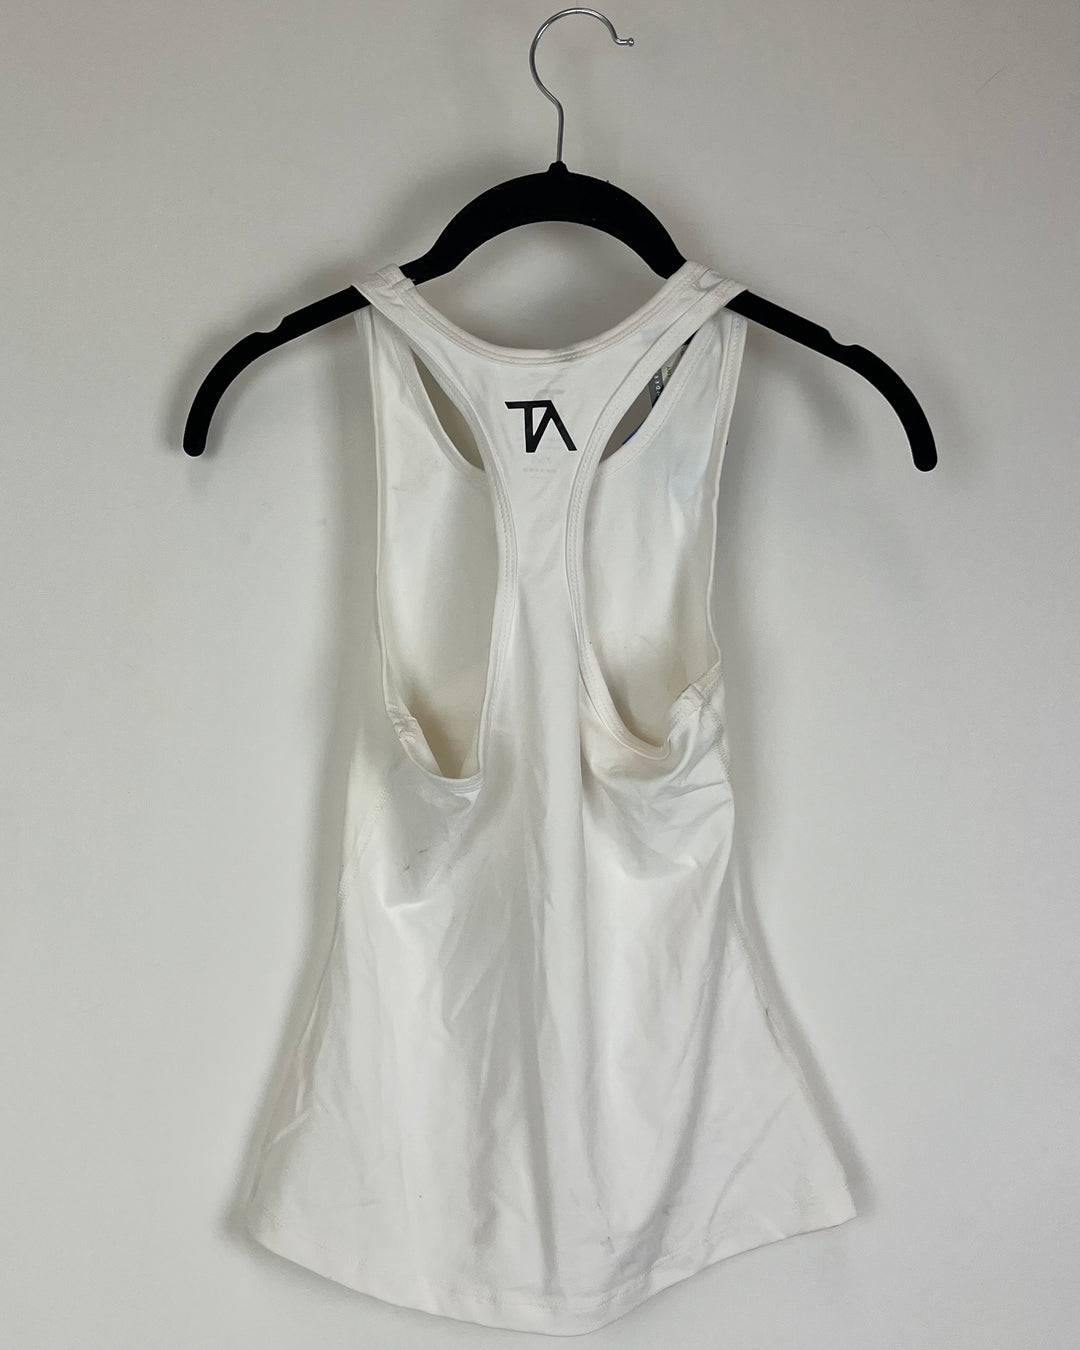 White Racerback Tank Top - Size 0/2 and 2/4